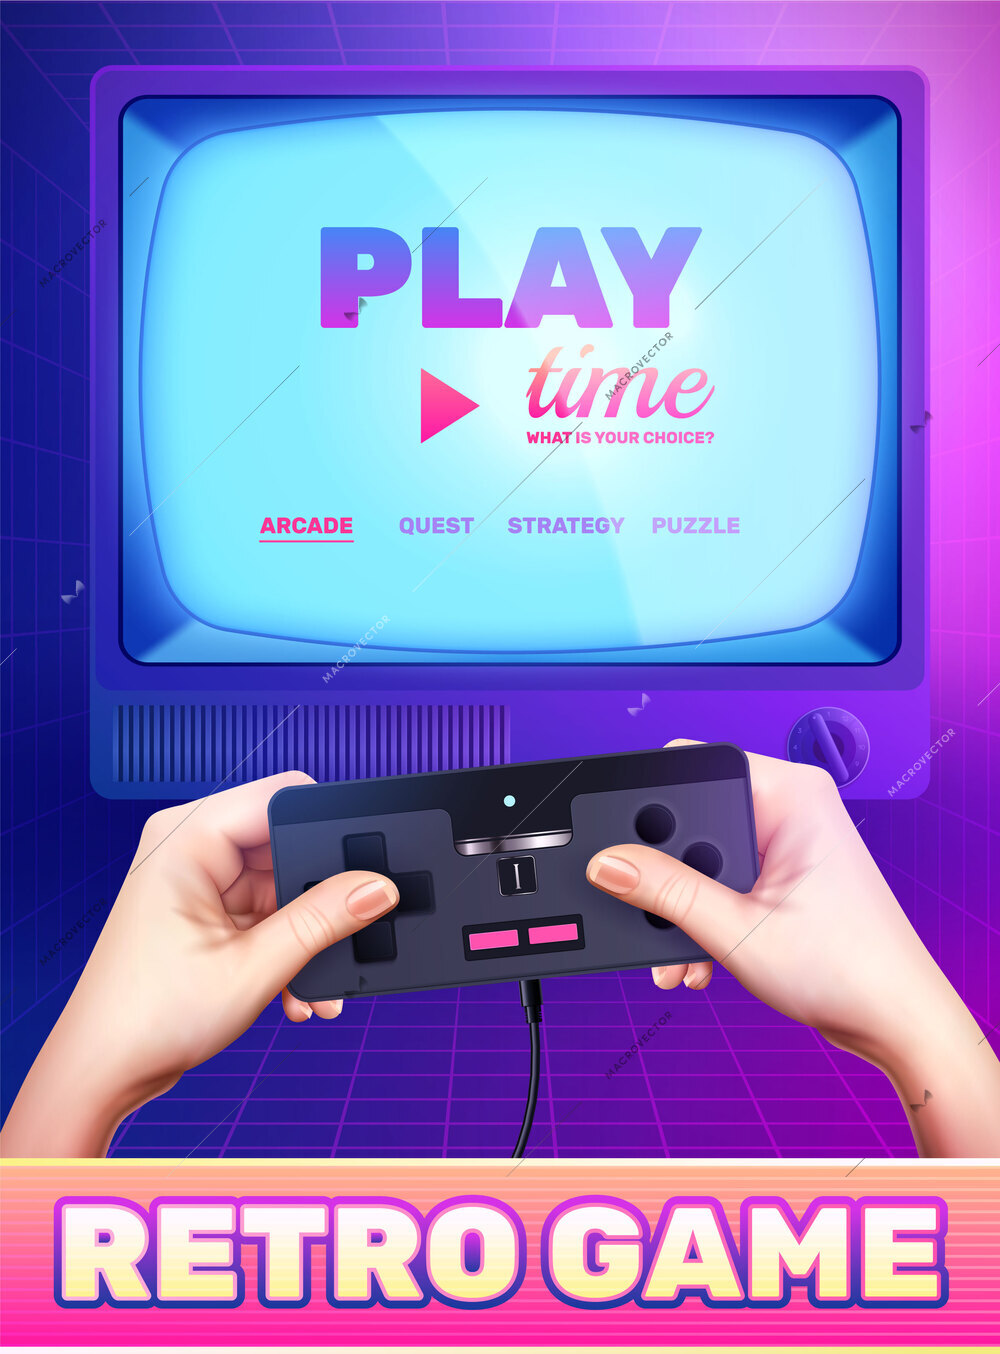 Retro vintage electronics gadgets realistic composition with editable text on television screen with gamepad in hands vector illustration